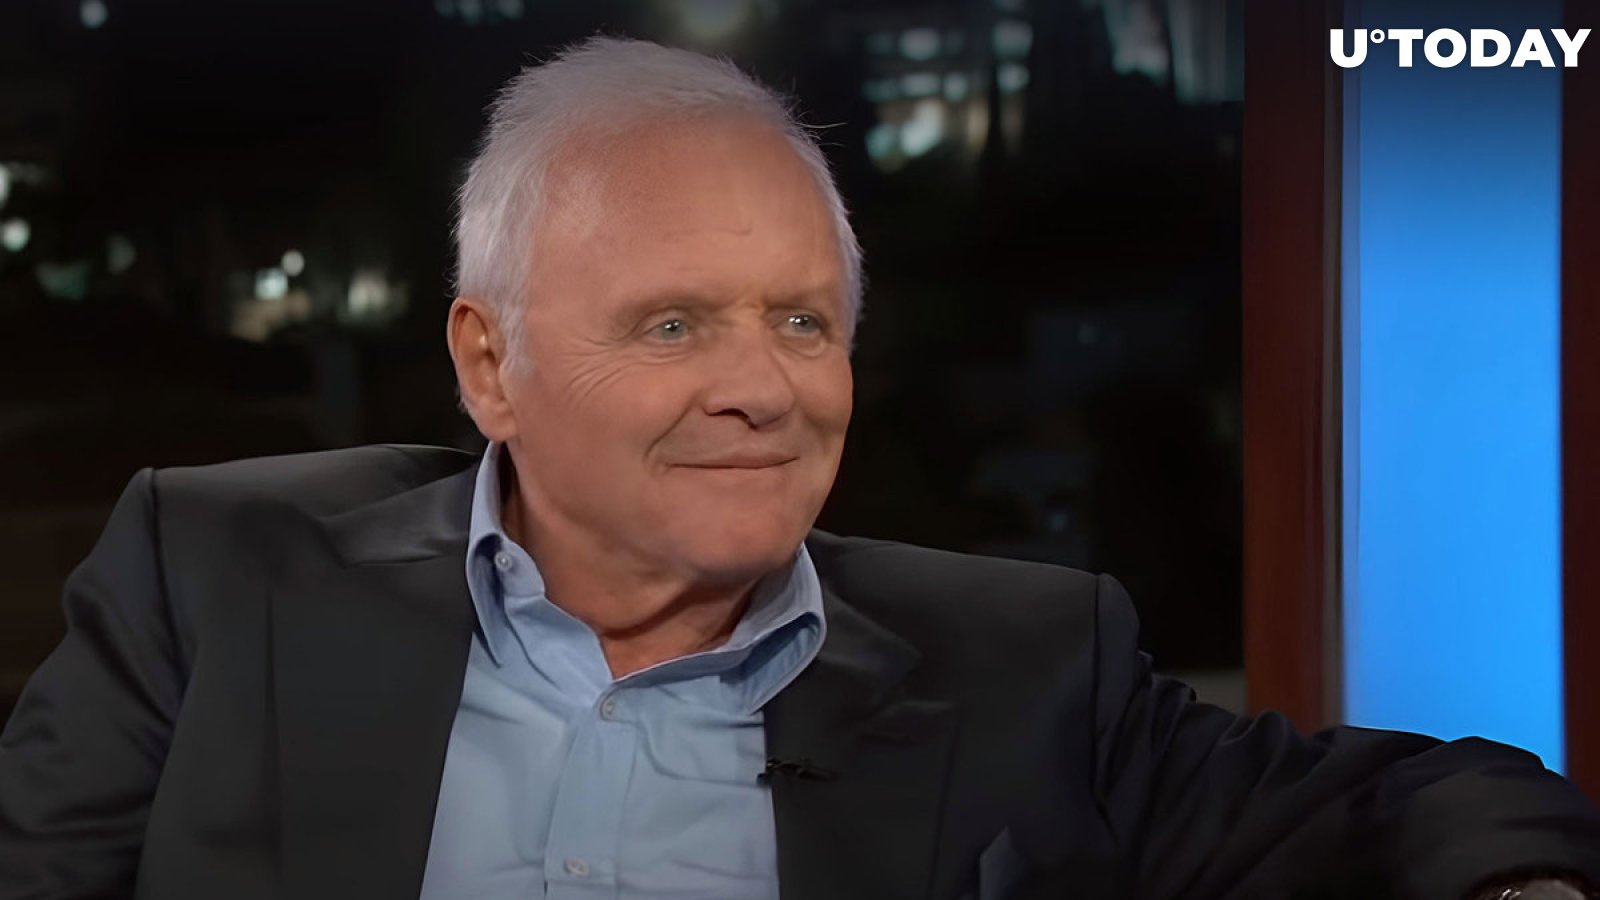 Oscar-Winning Anthony Hopkins Composes Piano Music for His NFT Buyers